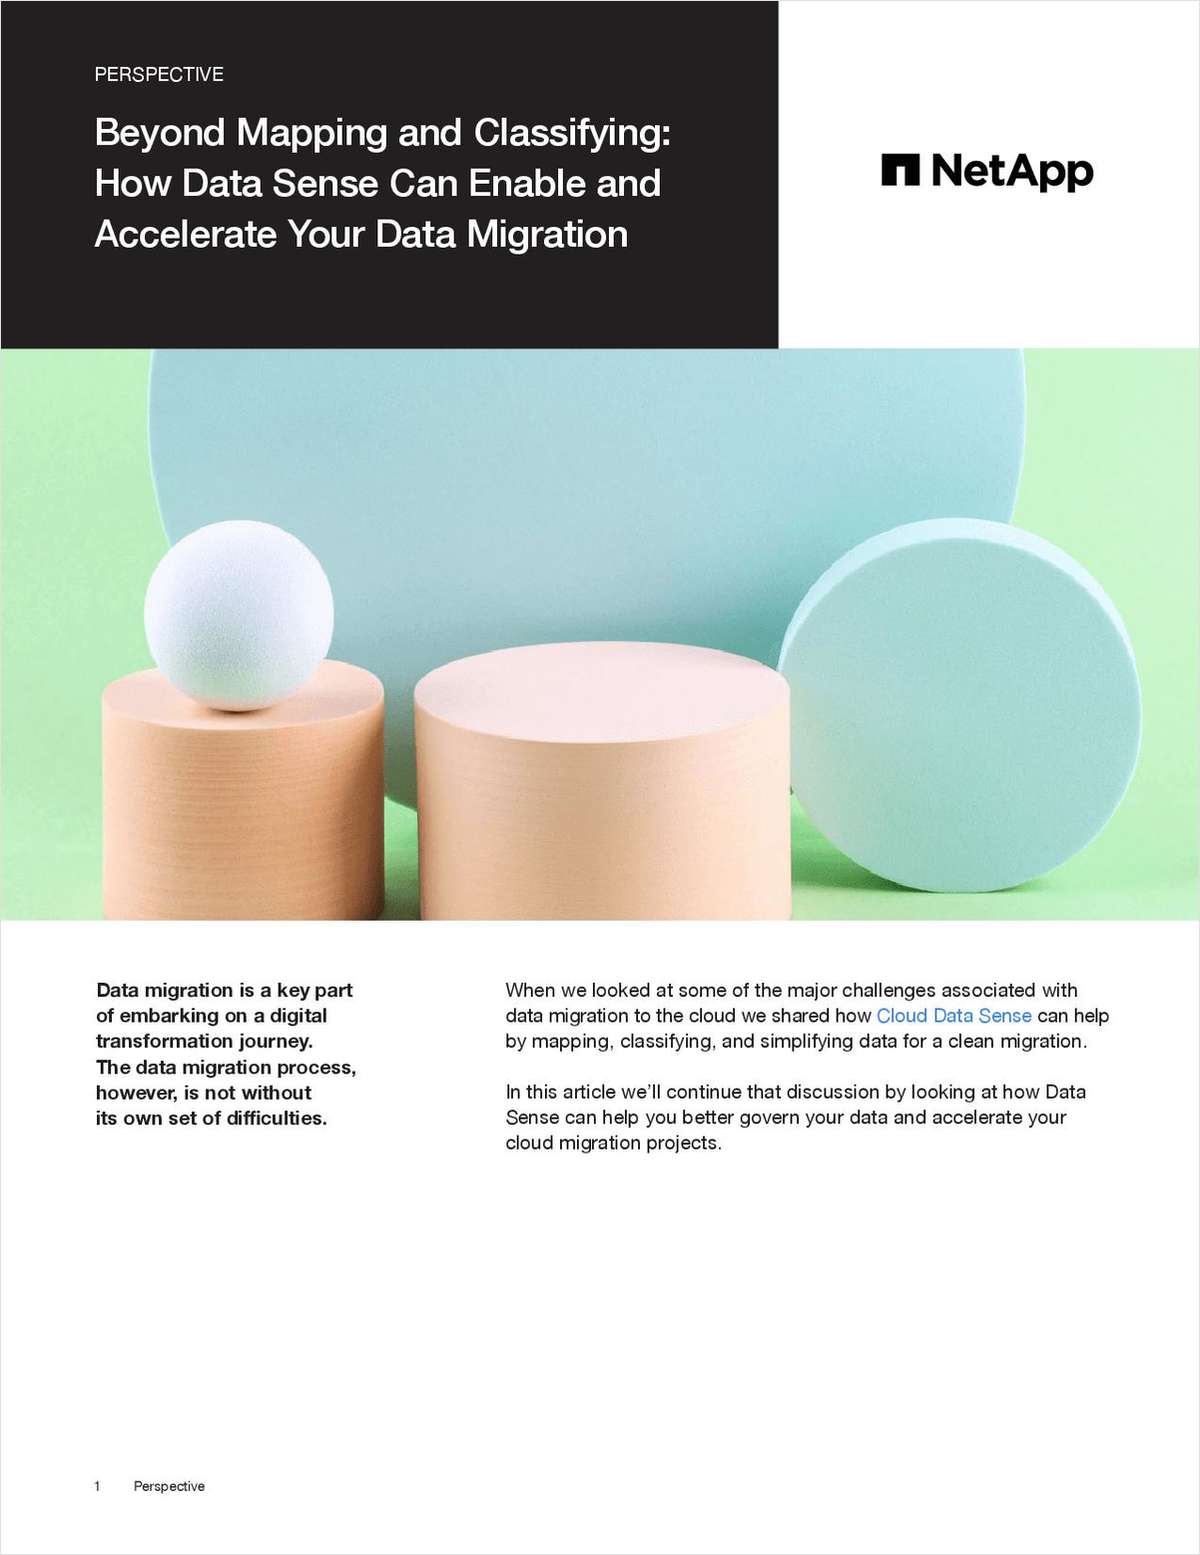 How Data Sense Can Enable and Accelerate Your Data Migration